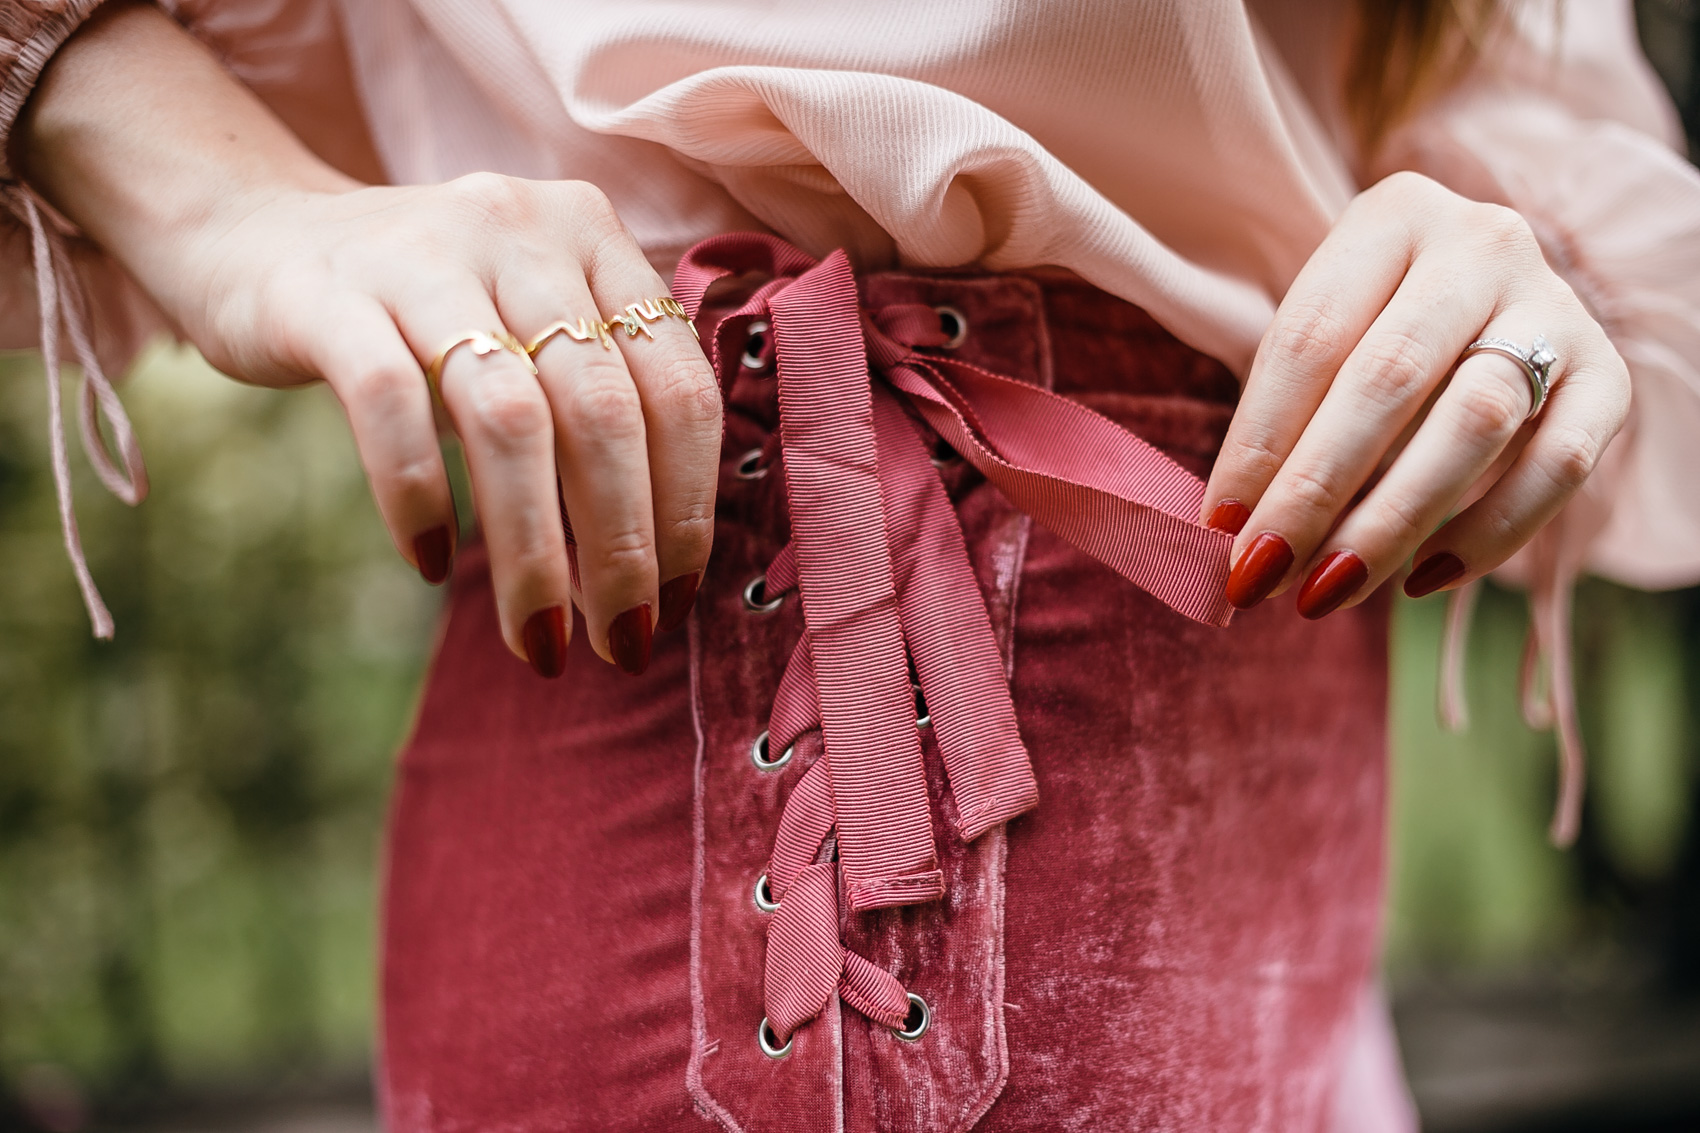 Dainty rinds, velvet side tie shorts in pink rose, red oval manicure nails and a blush blouse